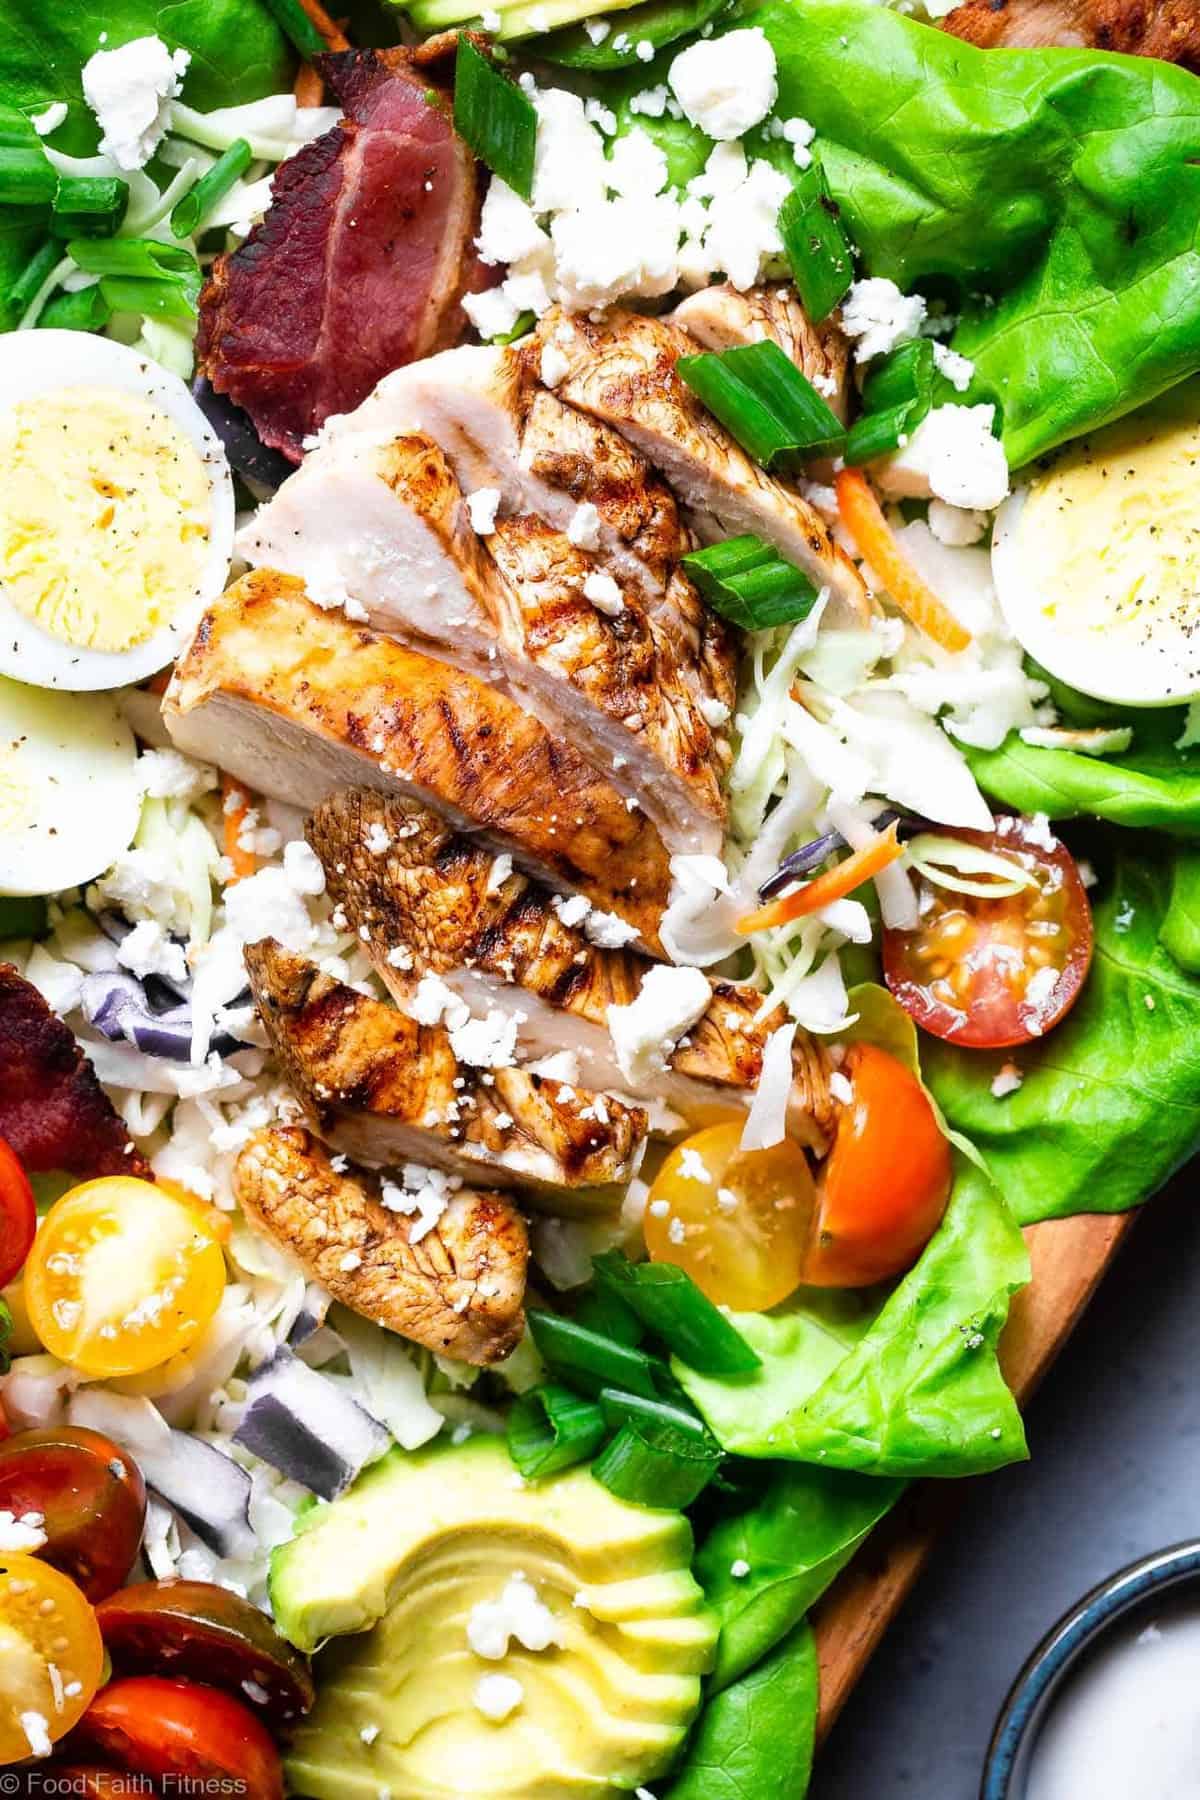 Healthy Chicken Cobb Salad Recipe - This quick, easy skinny Chicken Cobb Salad Recipe is a lighter remake that cuts over half the calories of the classic but not the taste! No one will know it's lighter, gluten free and lower carb! | #Foodfaithfitness | #Glutenfree #lowcarb #healthy #salad #grainfree